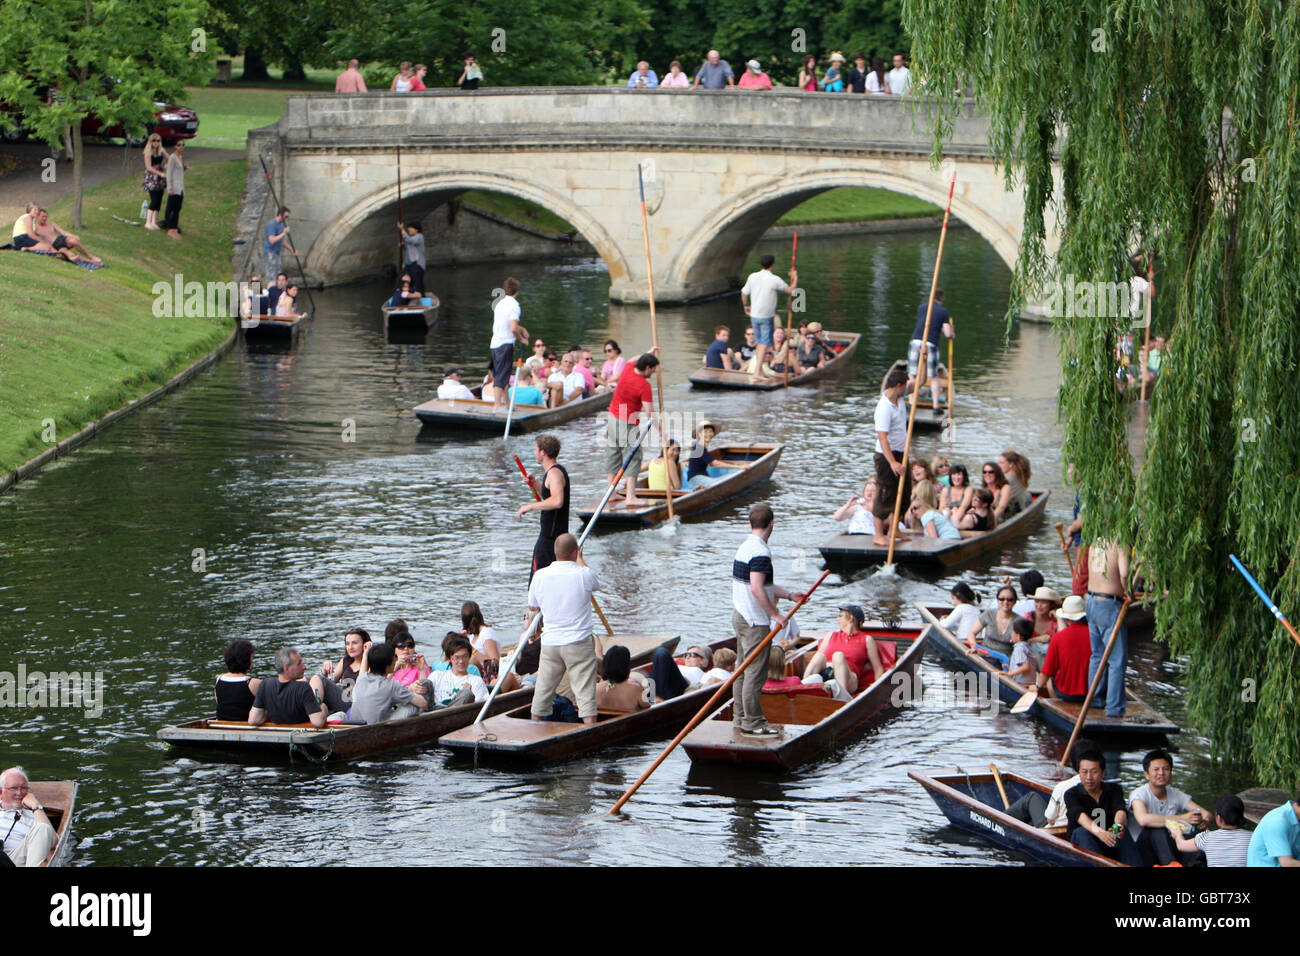 Punters in Cambridge City centre enjoy the summer sunshine along the busy River Cam, Cambridgeshire. Stock Photo